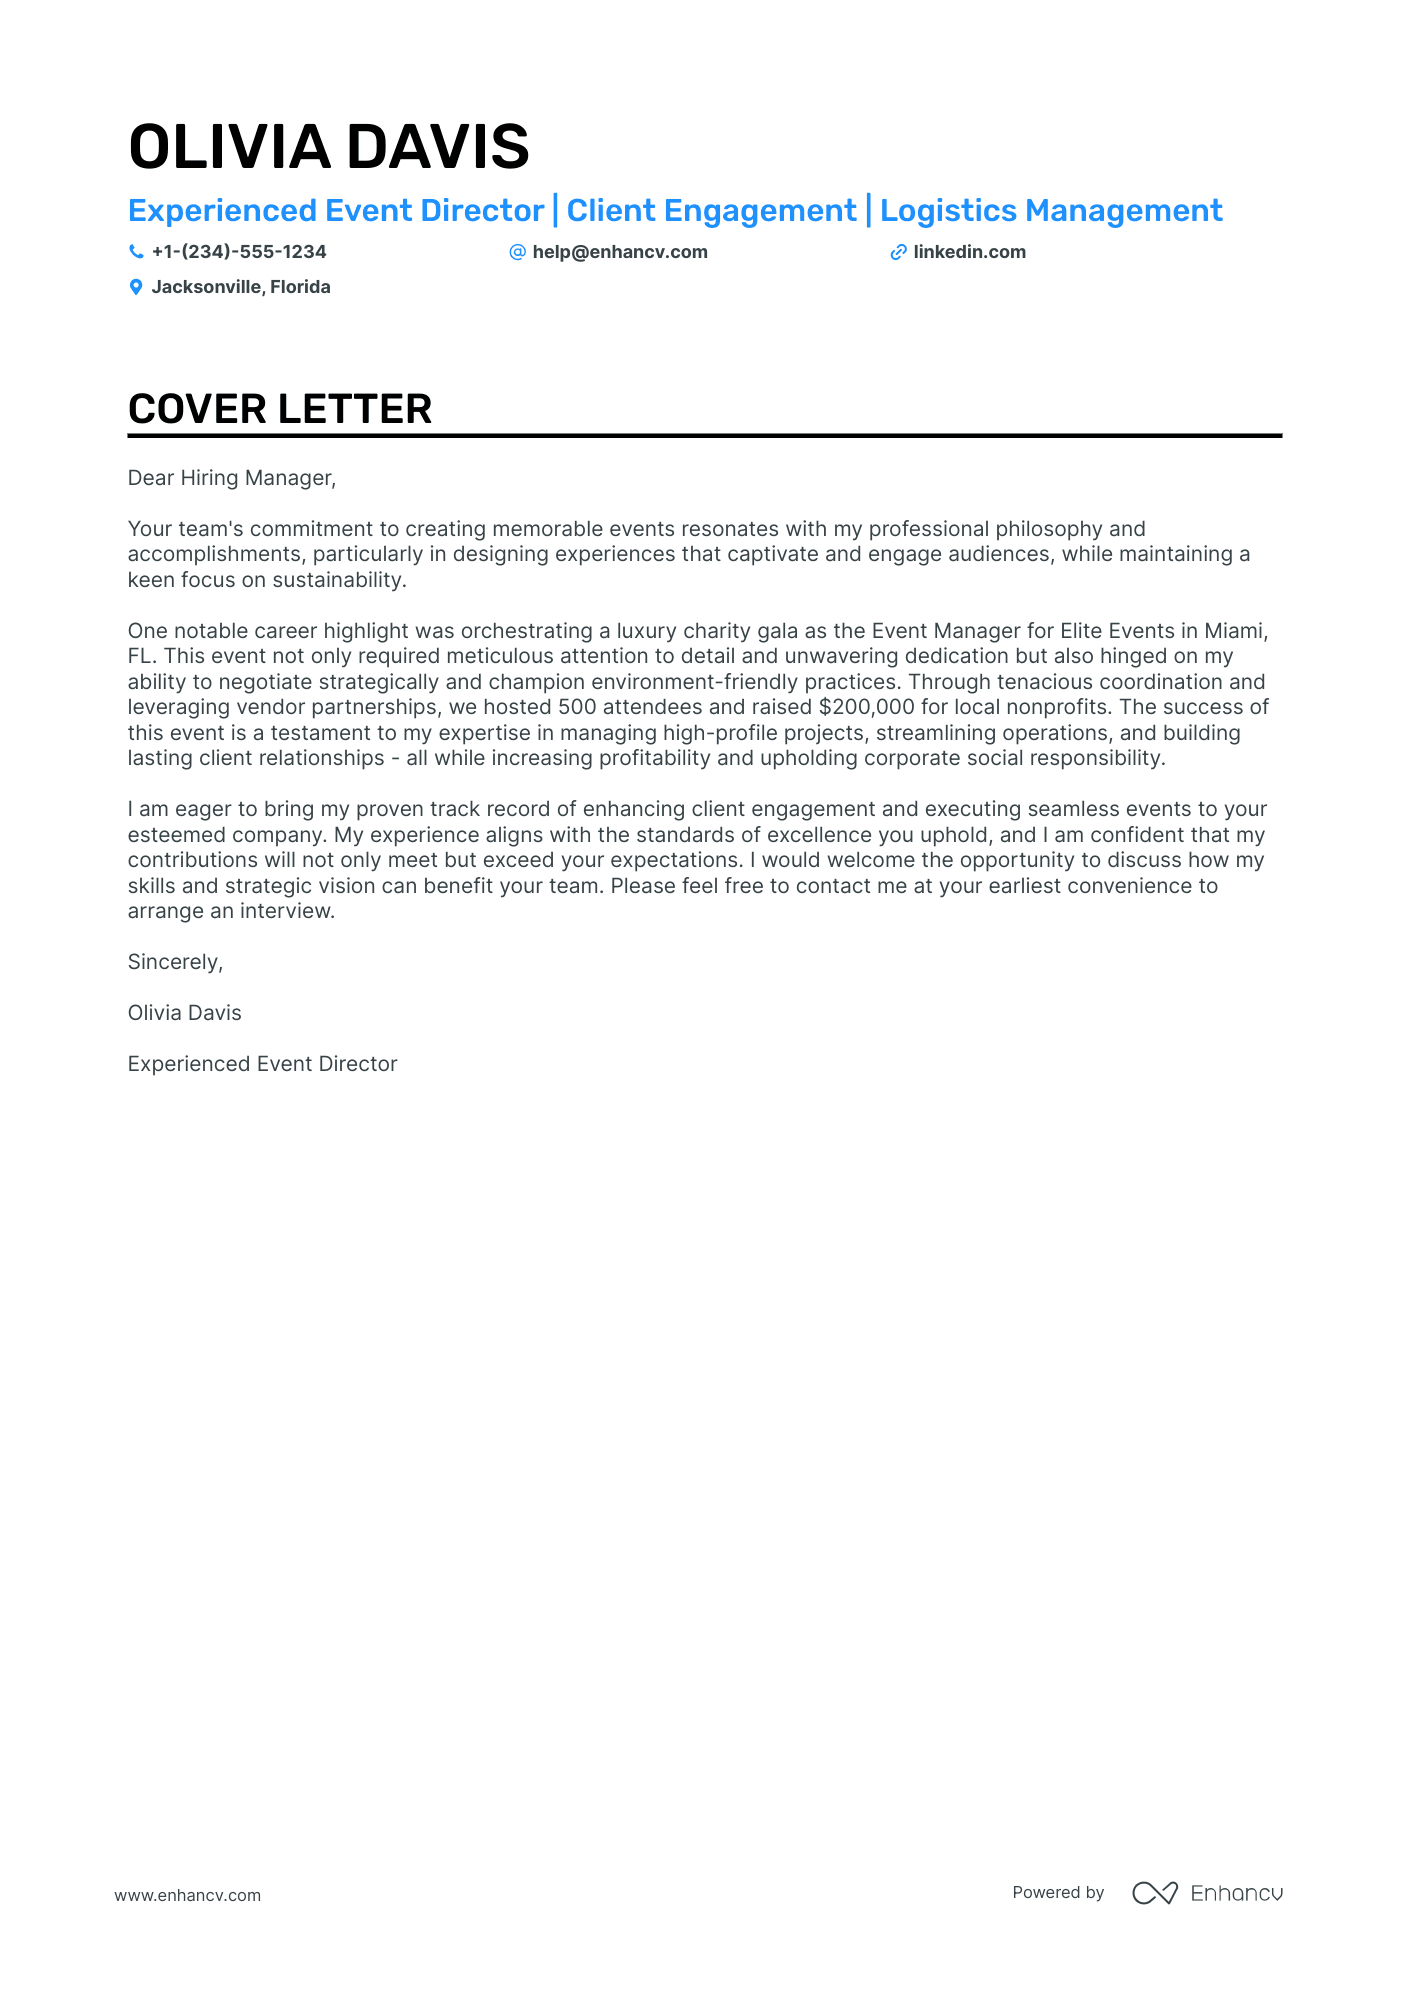 Event Director cover letter